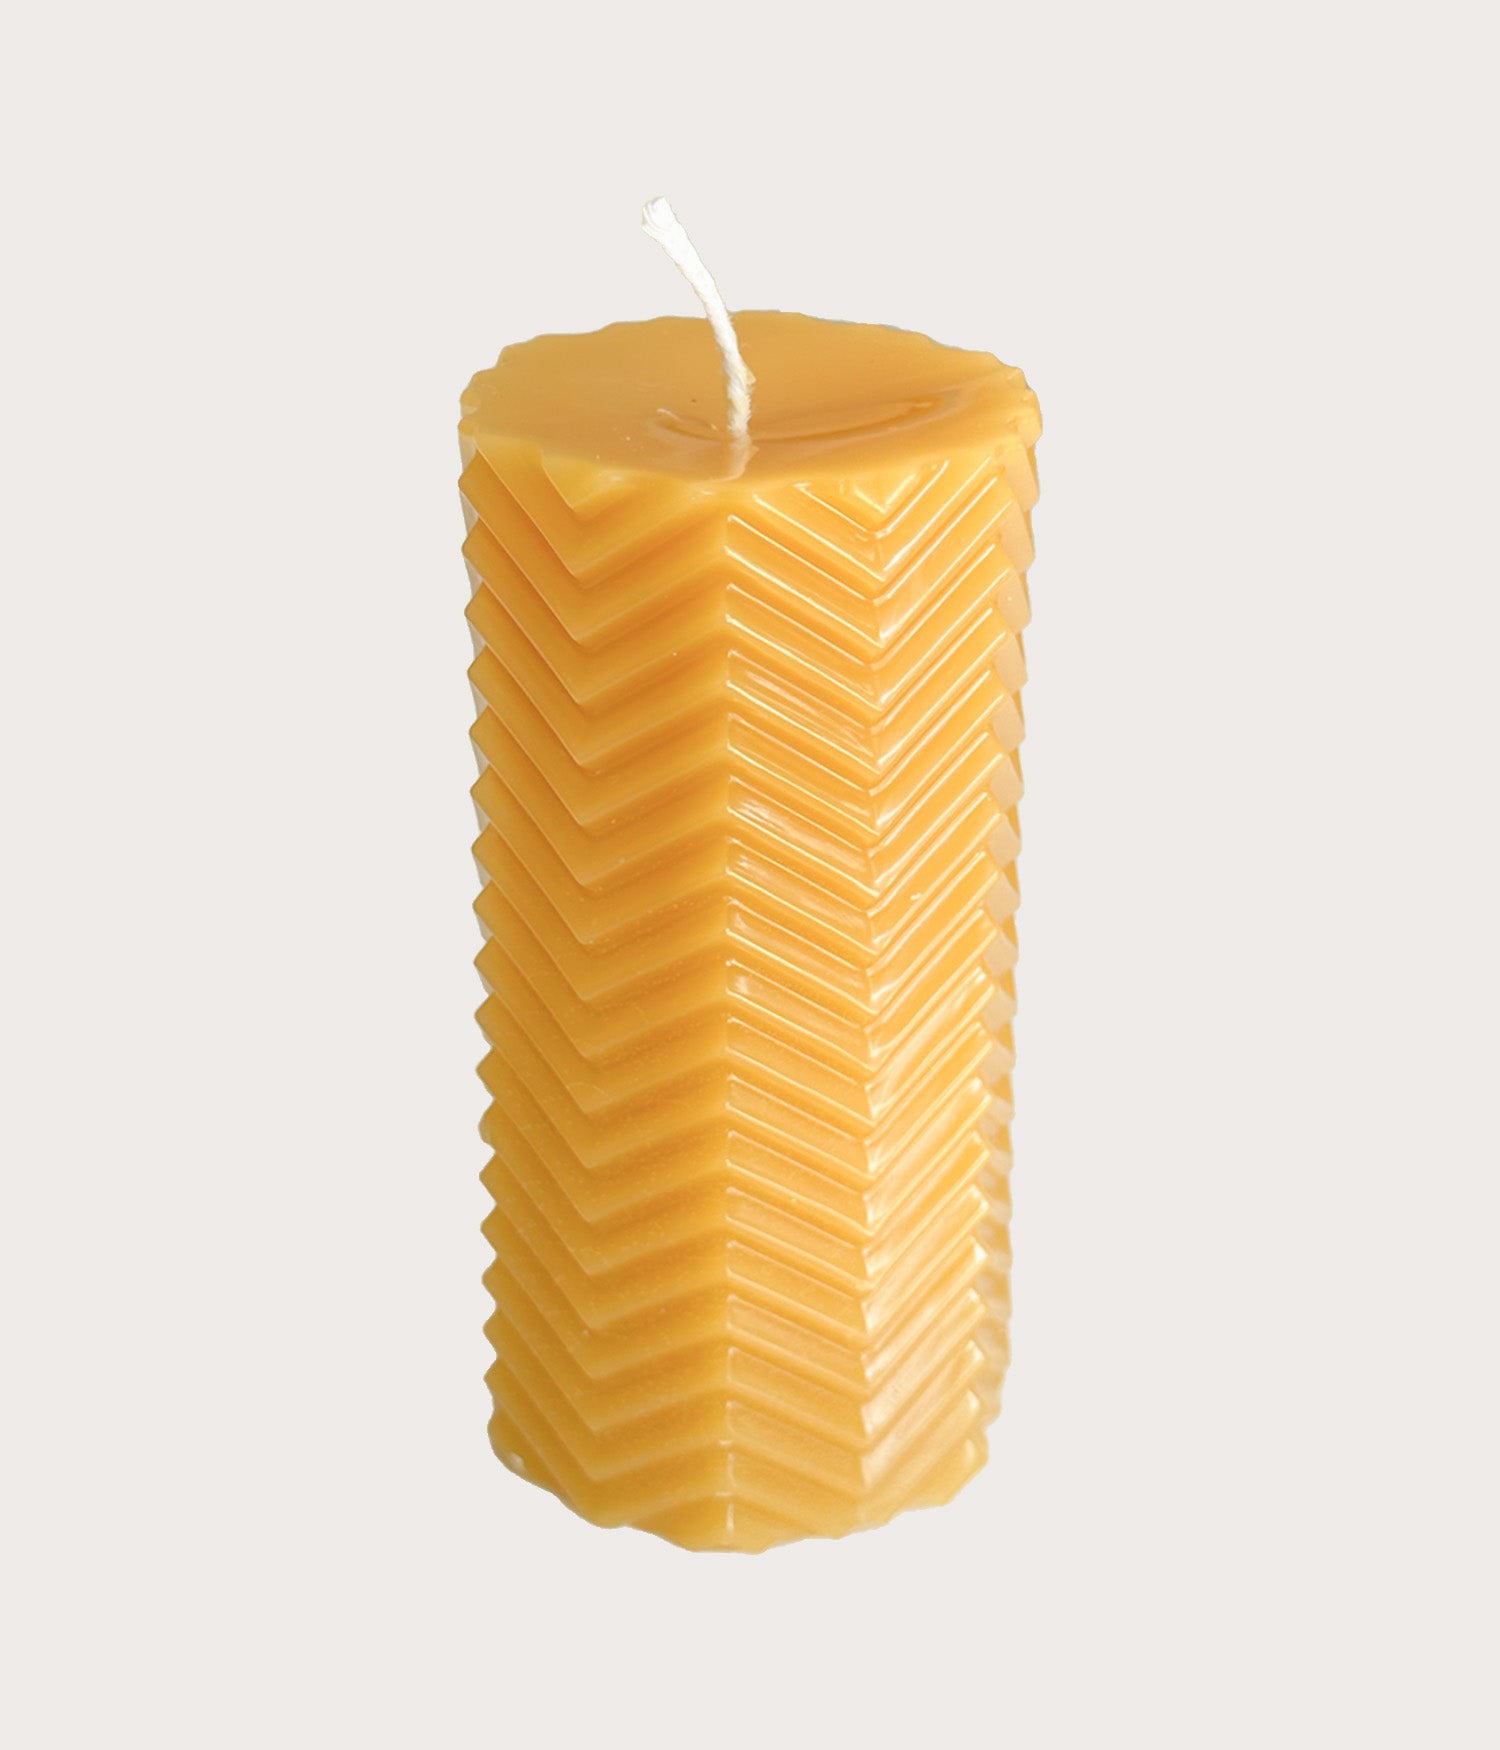 Beeswax candle - Moa